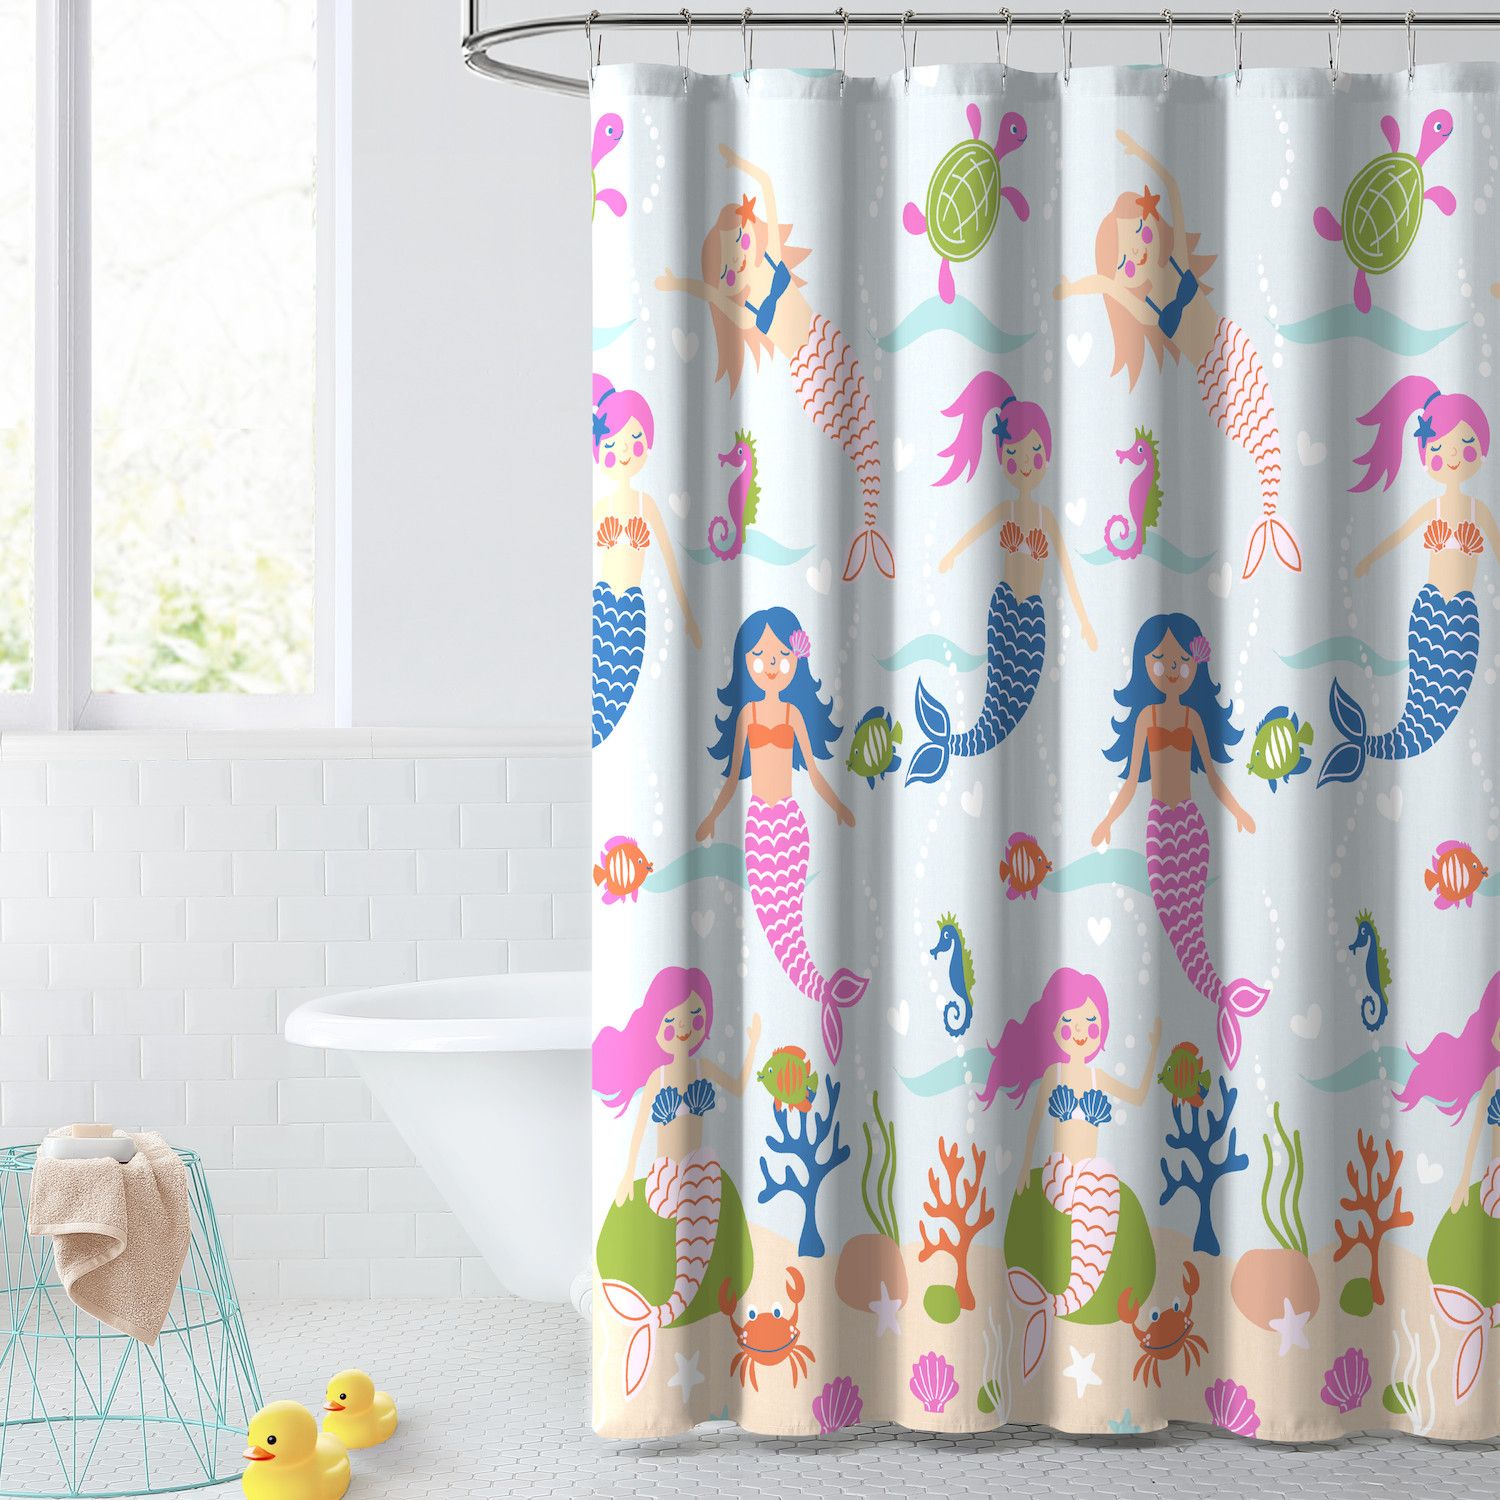 Image for Dream Factory Mermaid Dreams Shower Curtain at Kohl's.